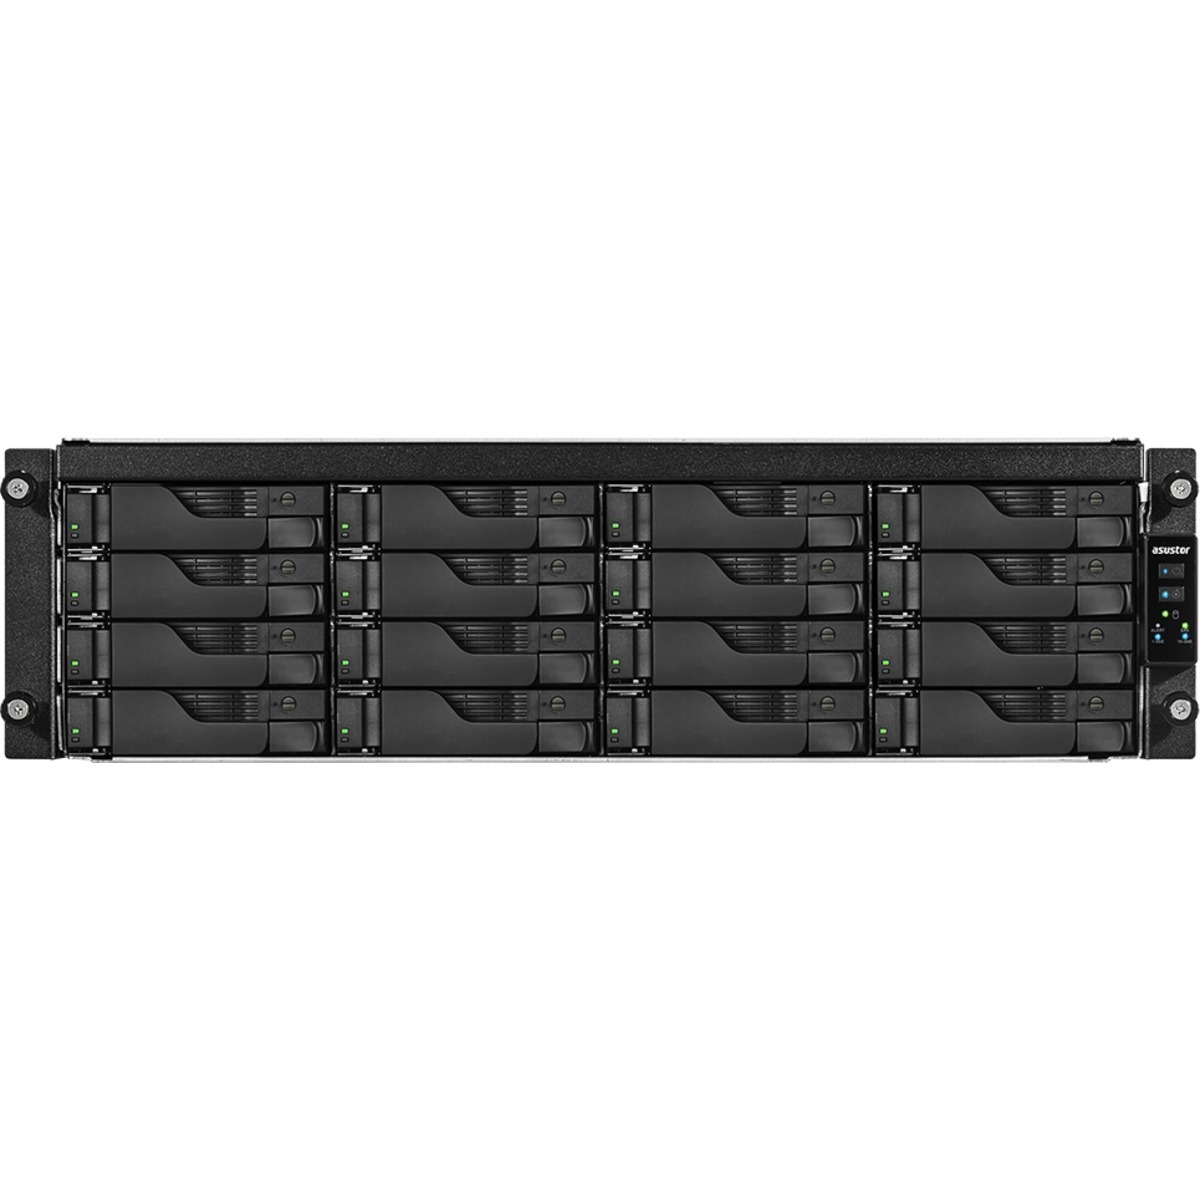 ASUSTOR AS7116RDX Lockerstor 16R Pro 256tb 16-Bay RackMount Large Business / Enterprise NAS - Network Attached Storage Device 16x16tb Seagate IronWolf Pro ST16000NT001 3.5 7200rpm SATA 6Gb/s HDD NAS Class Drives Installed - Burn-In Tested - ON SALE AS7116RDX Lockerstor 16R Pro